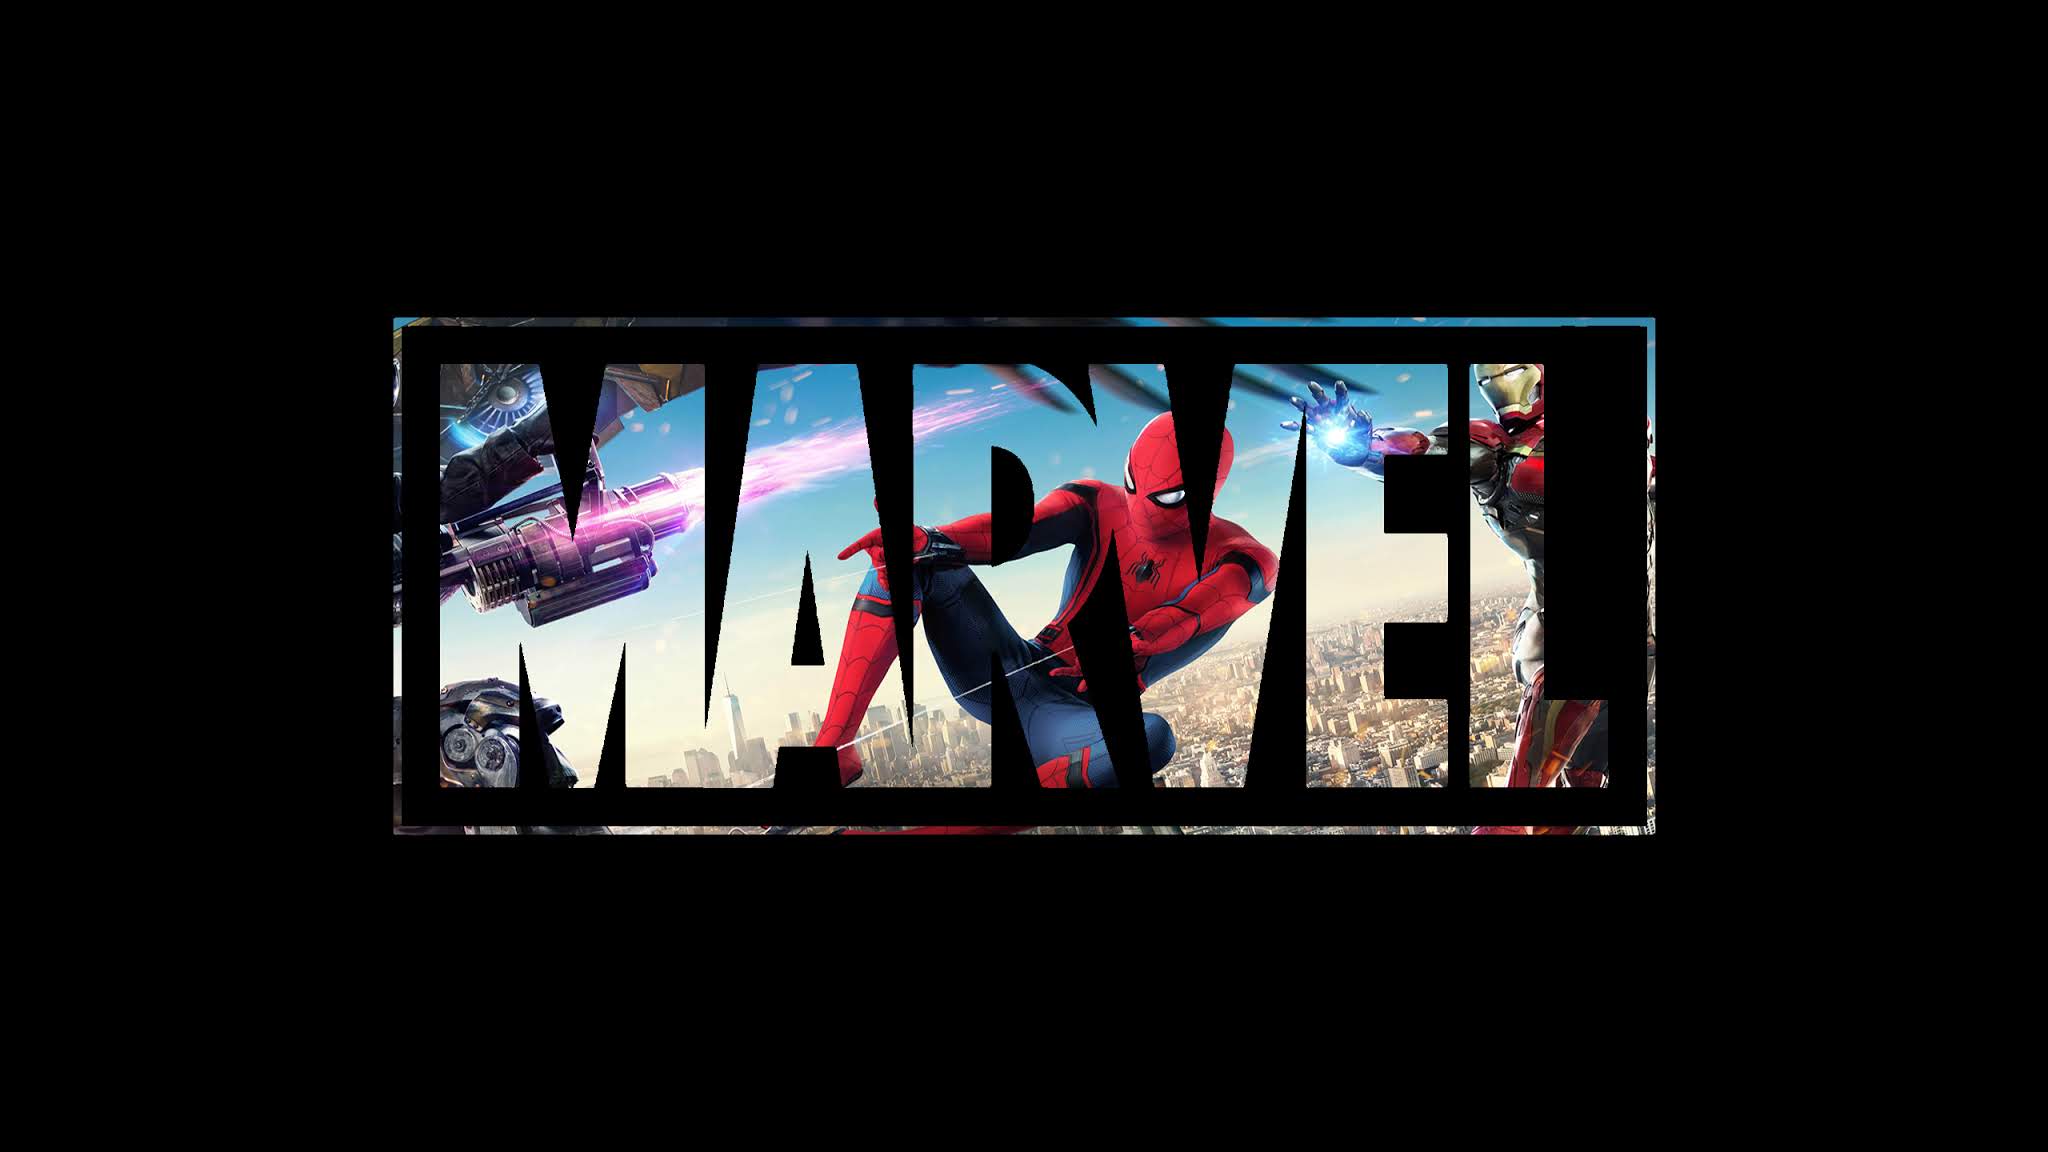 Spiderman in front of the word marvel - Marvel